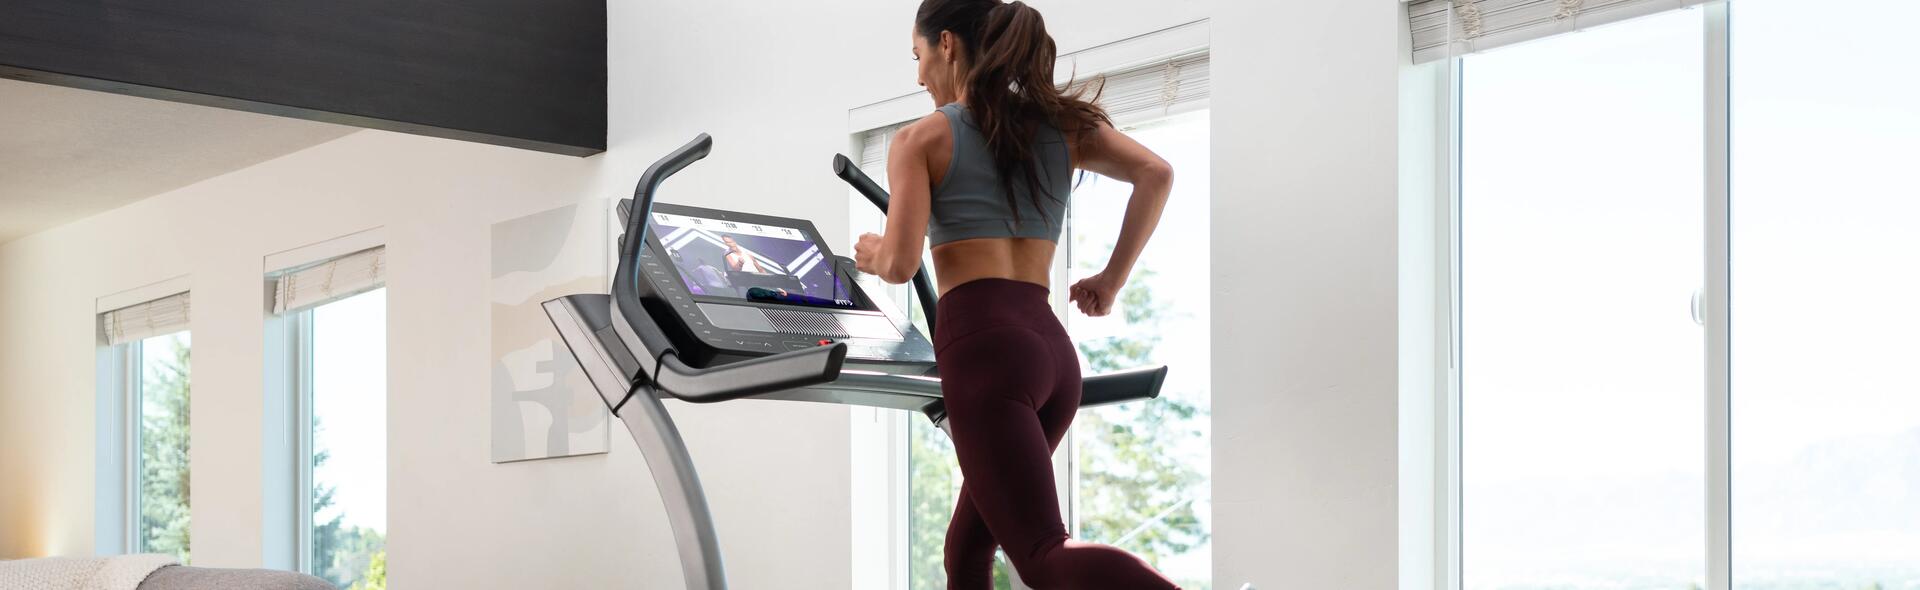 How to Choose a Home Treadmill